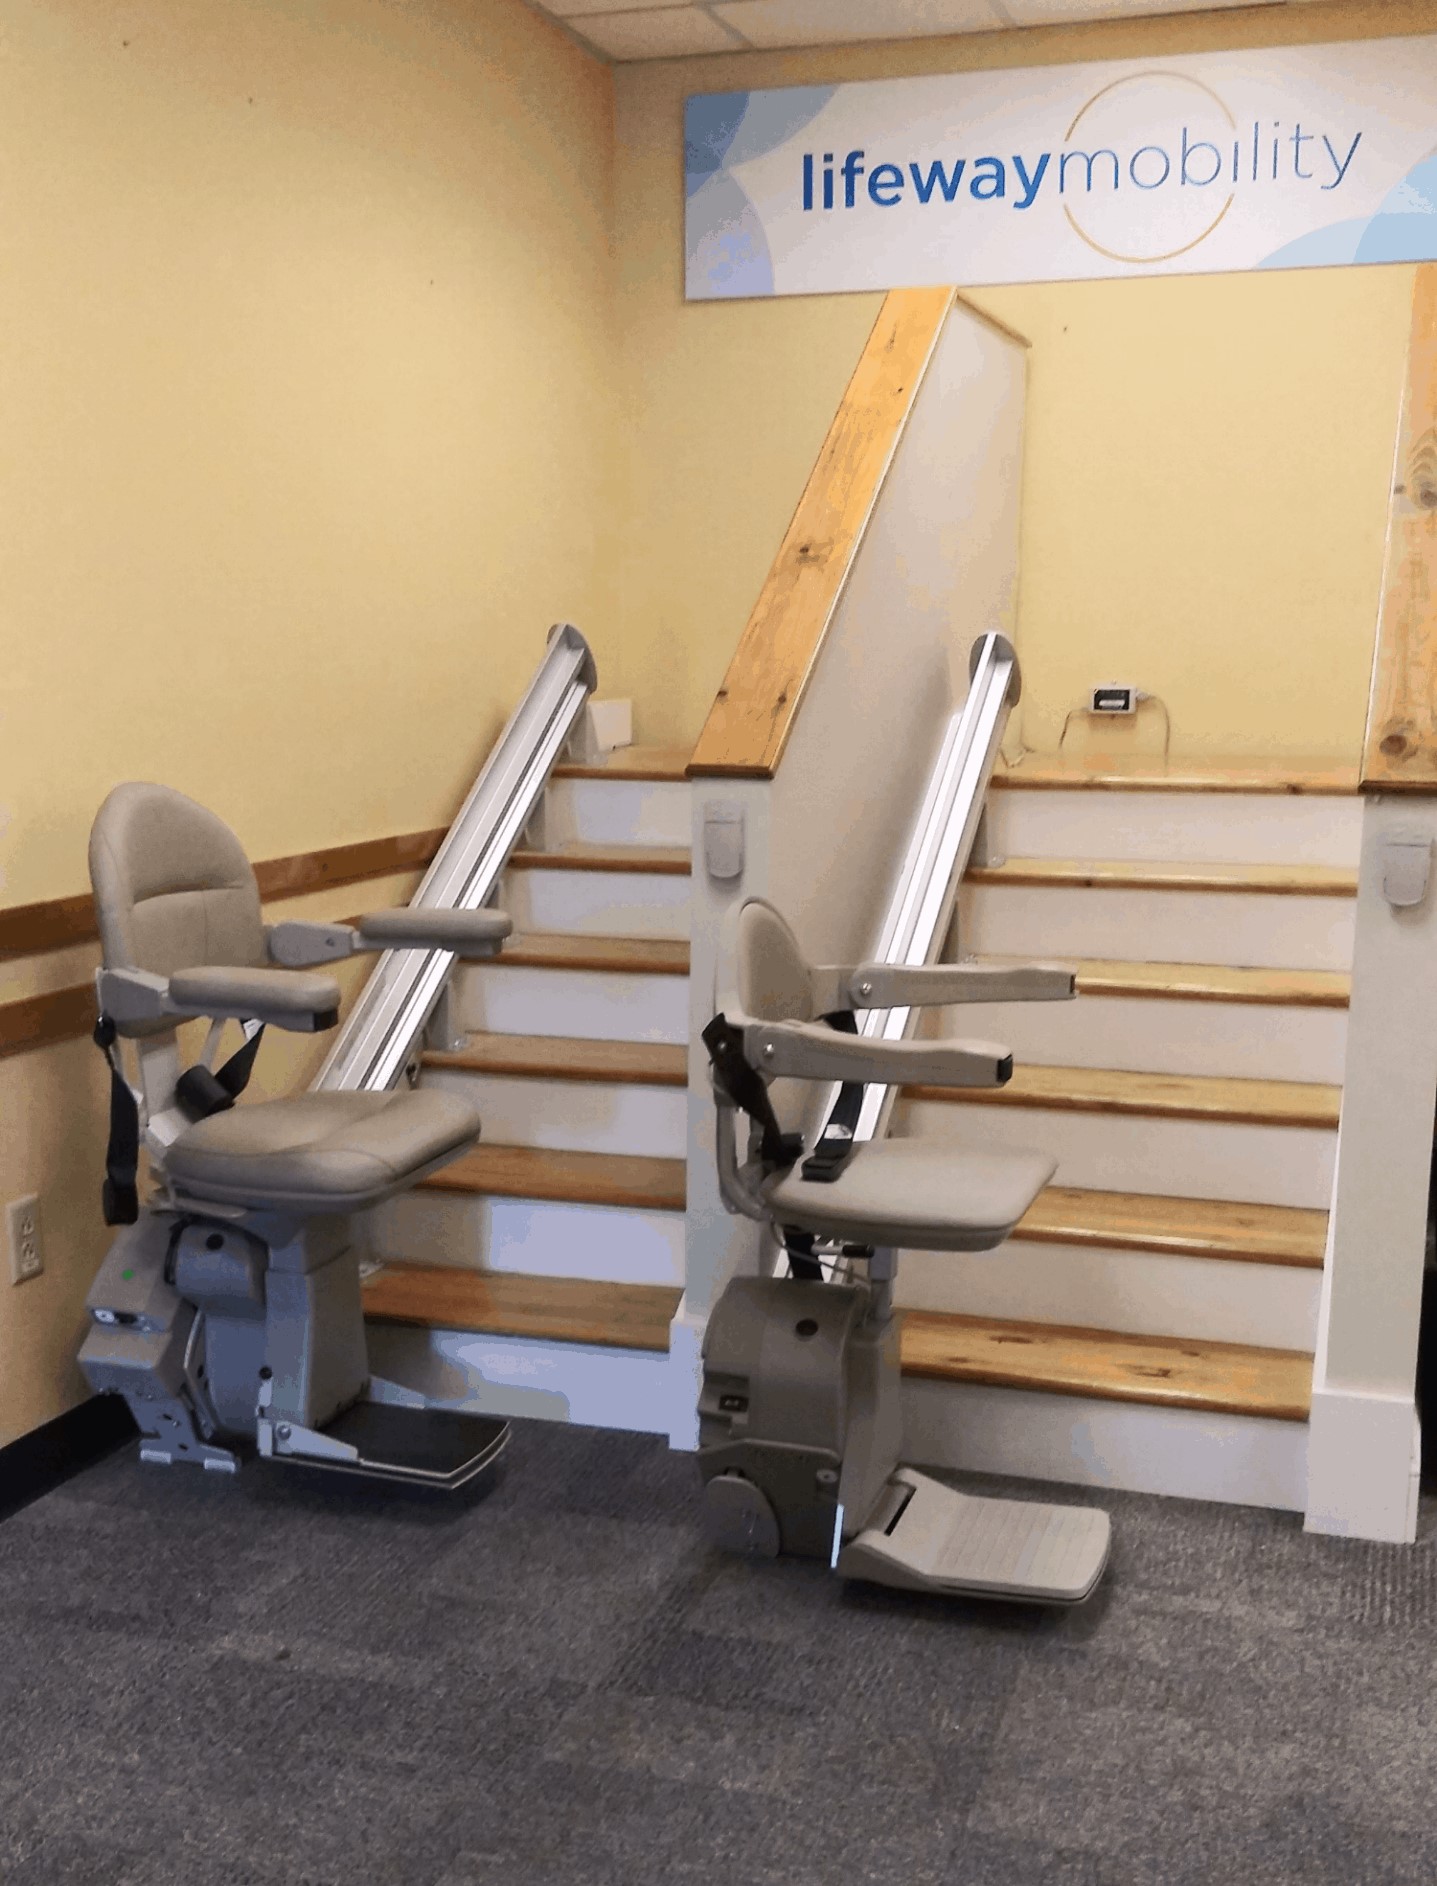 stair lifts in Lifeway Mobility Boston showroom